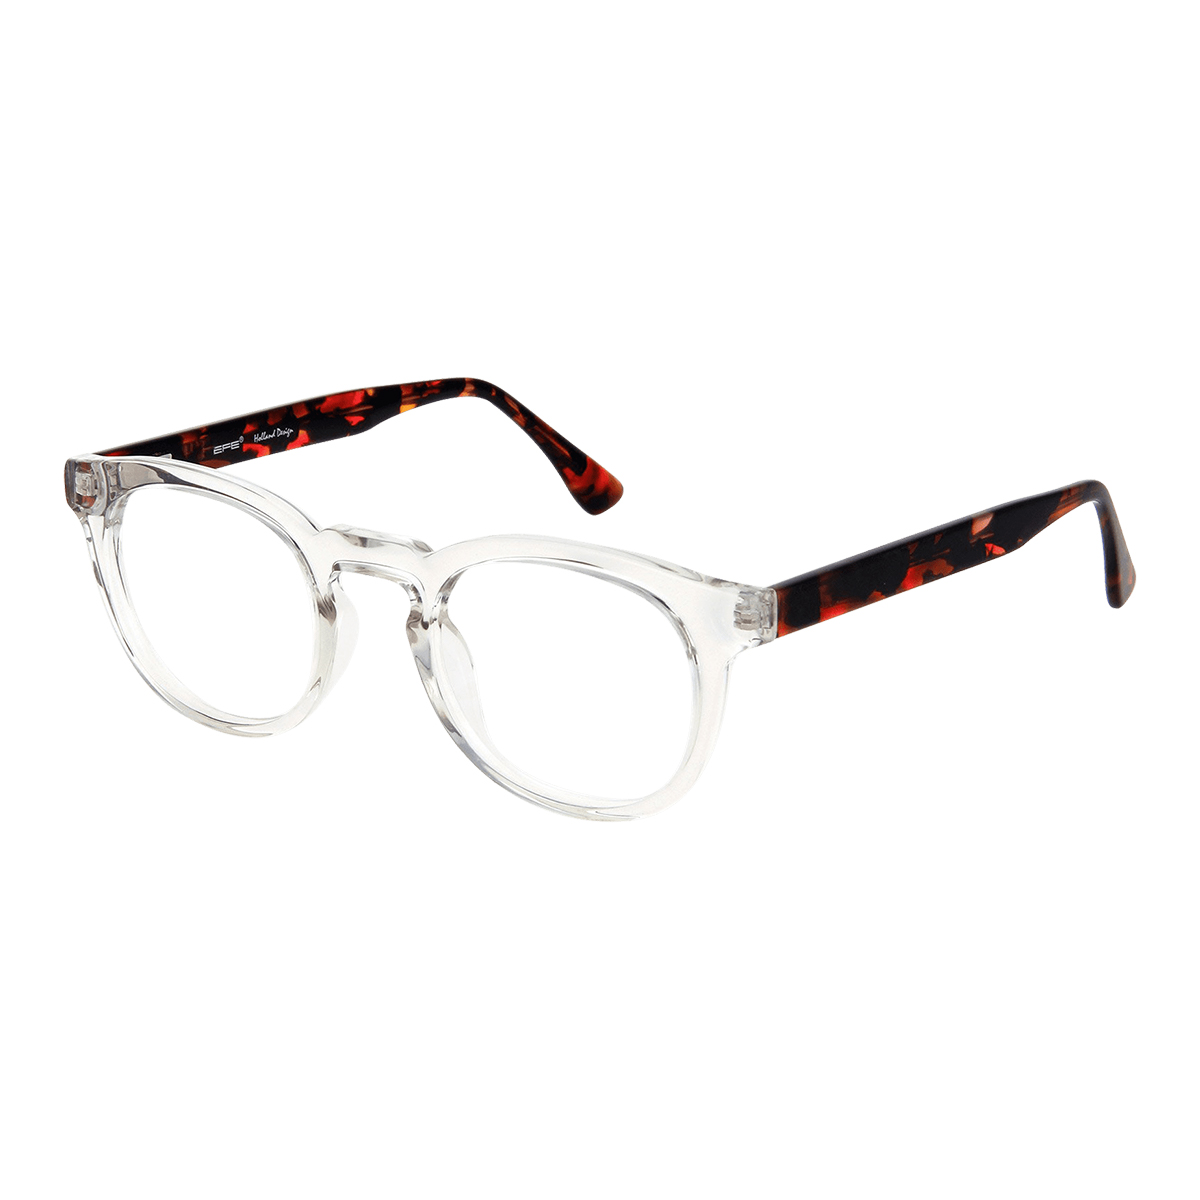 Malis - Round Transparent Reading Glasses for Women